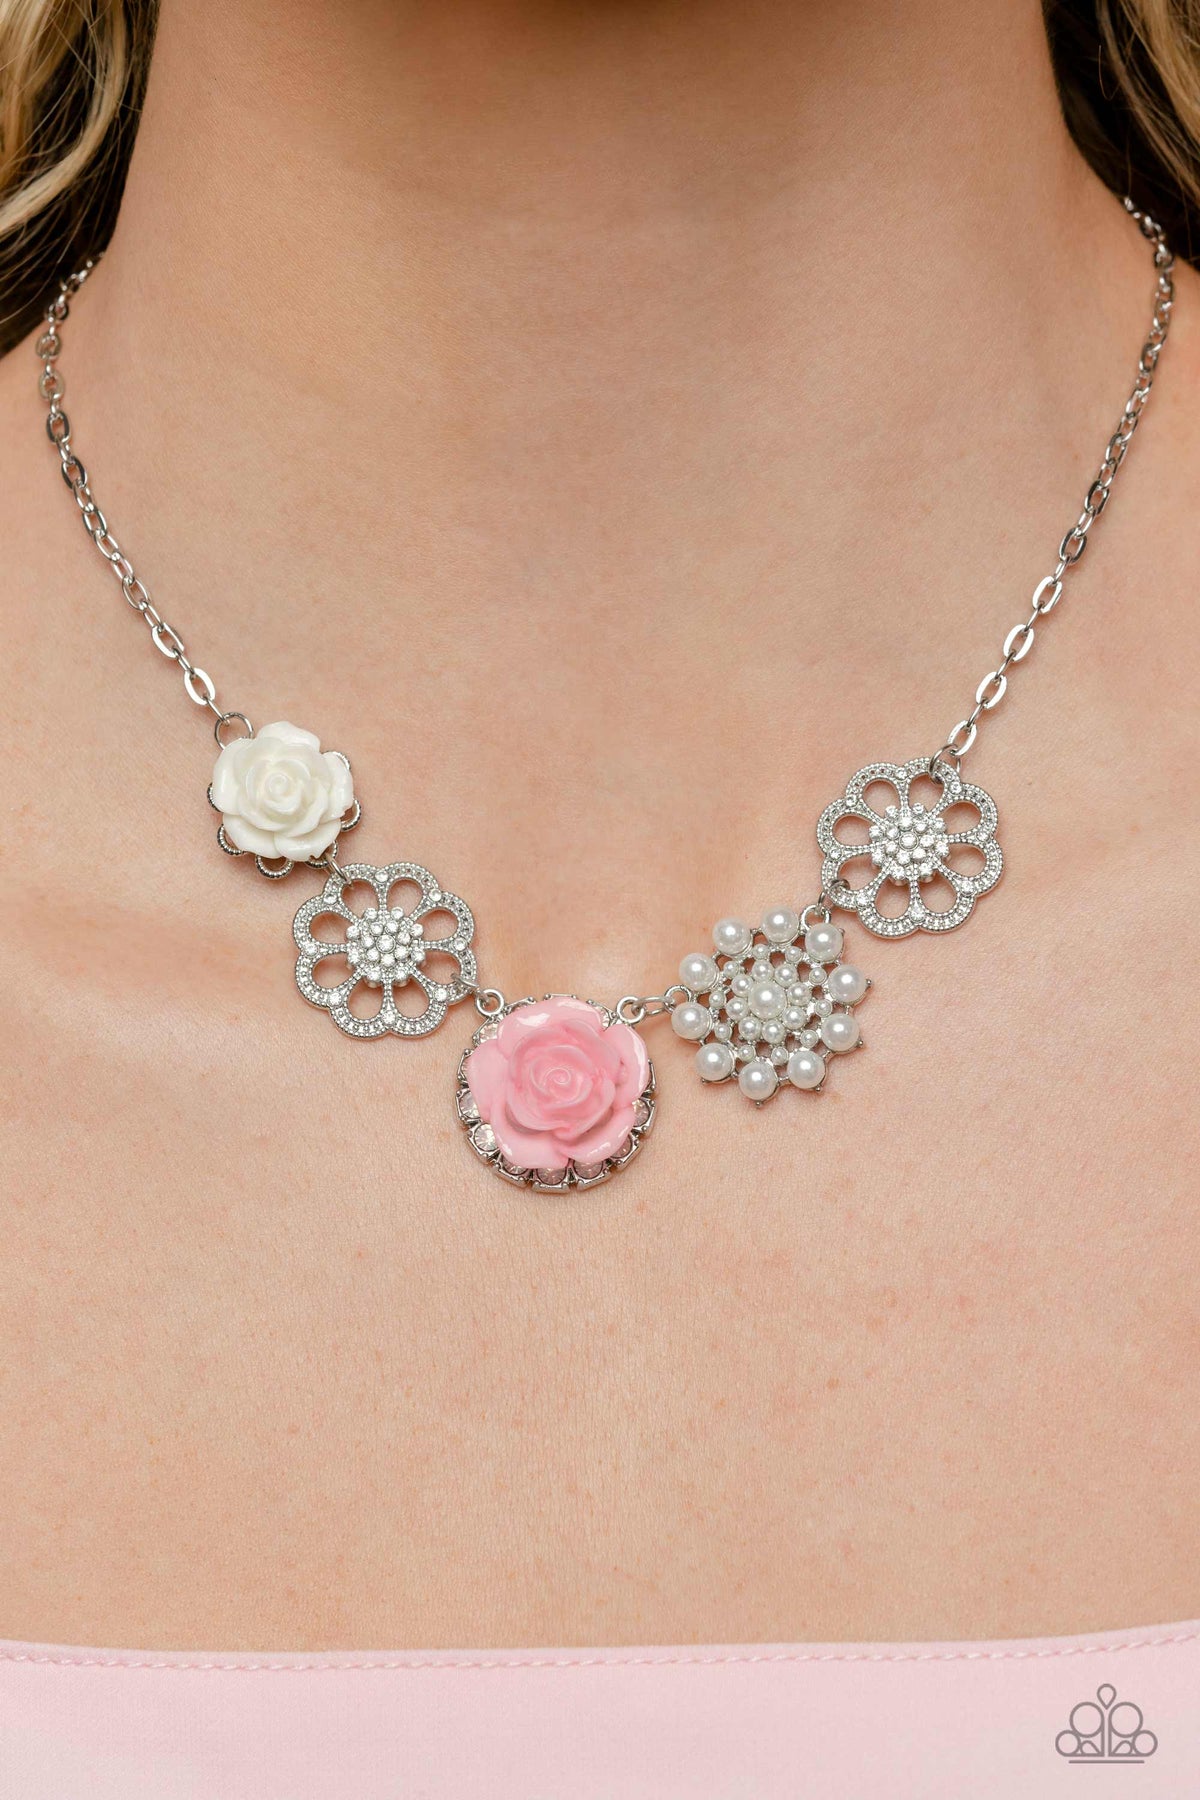 Tea Party Favors Pink Floral Necklace - Paparazzi Accessories-on model - CarasShop.com - $5 Jewelry by Cara Jewels